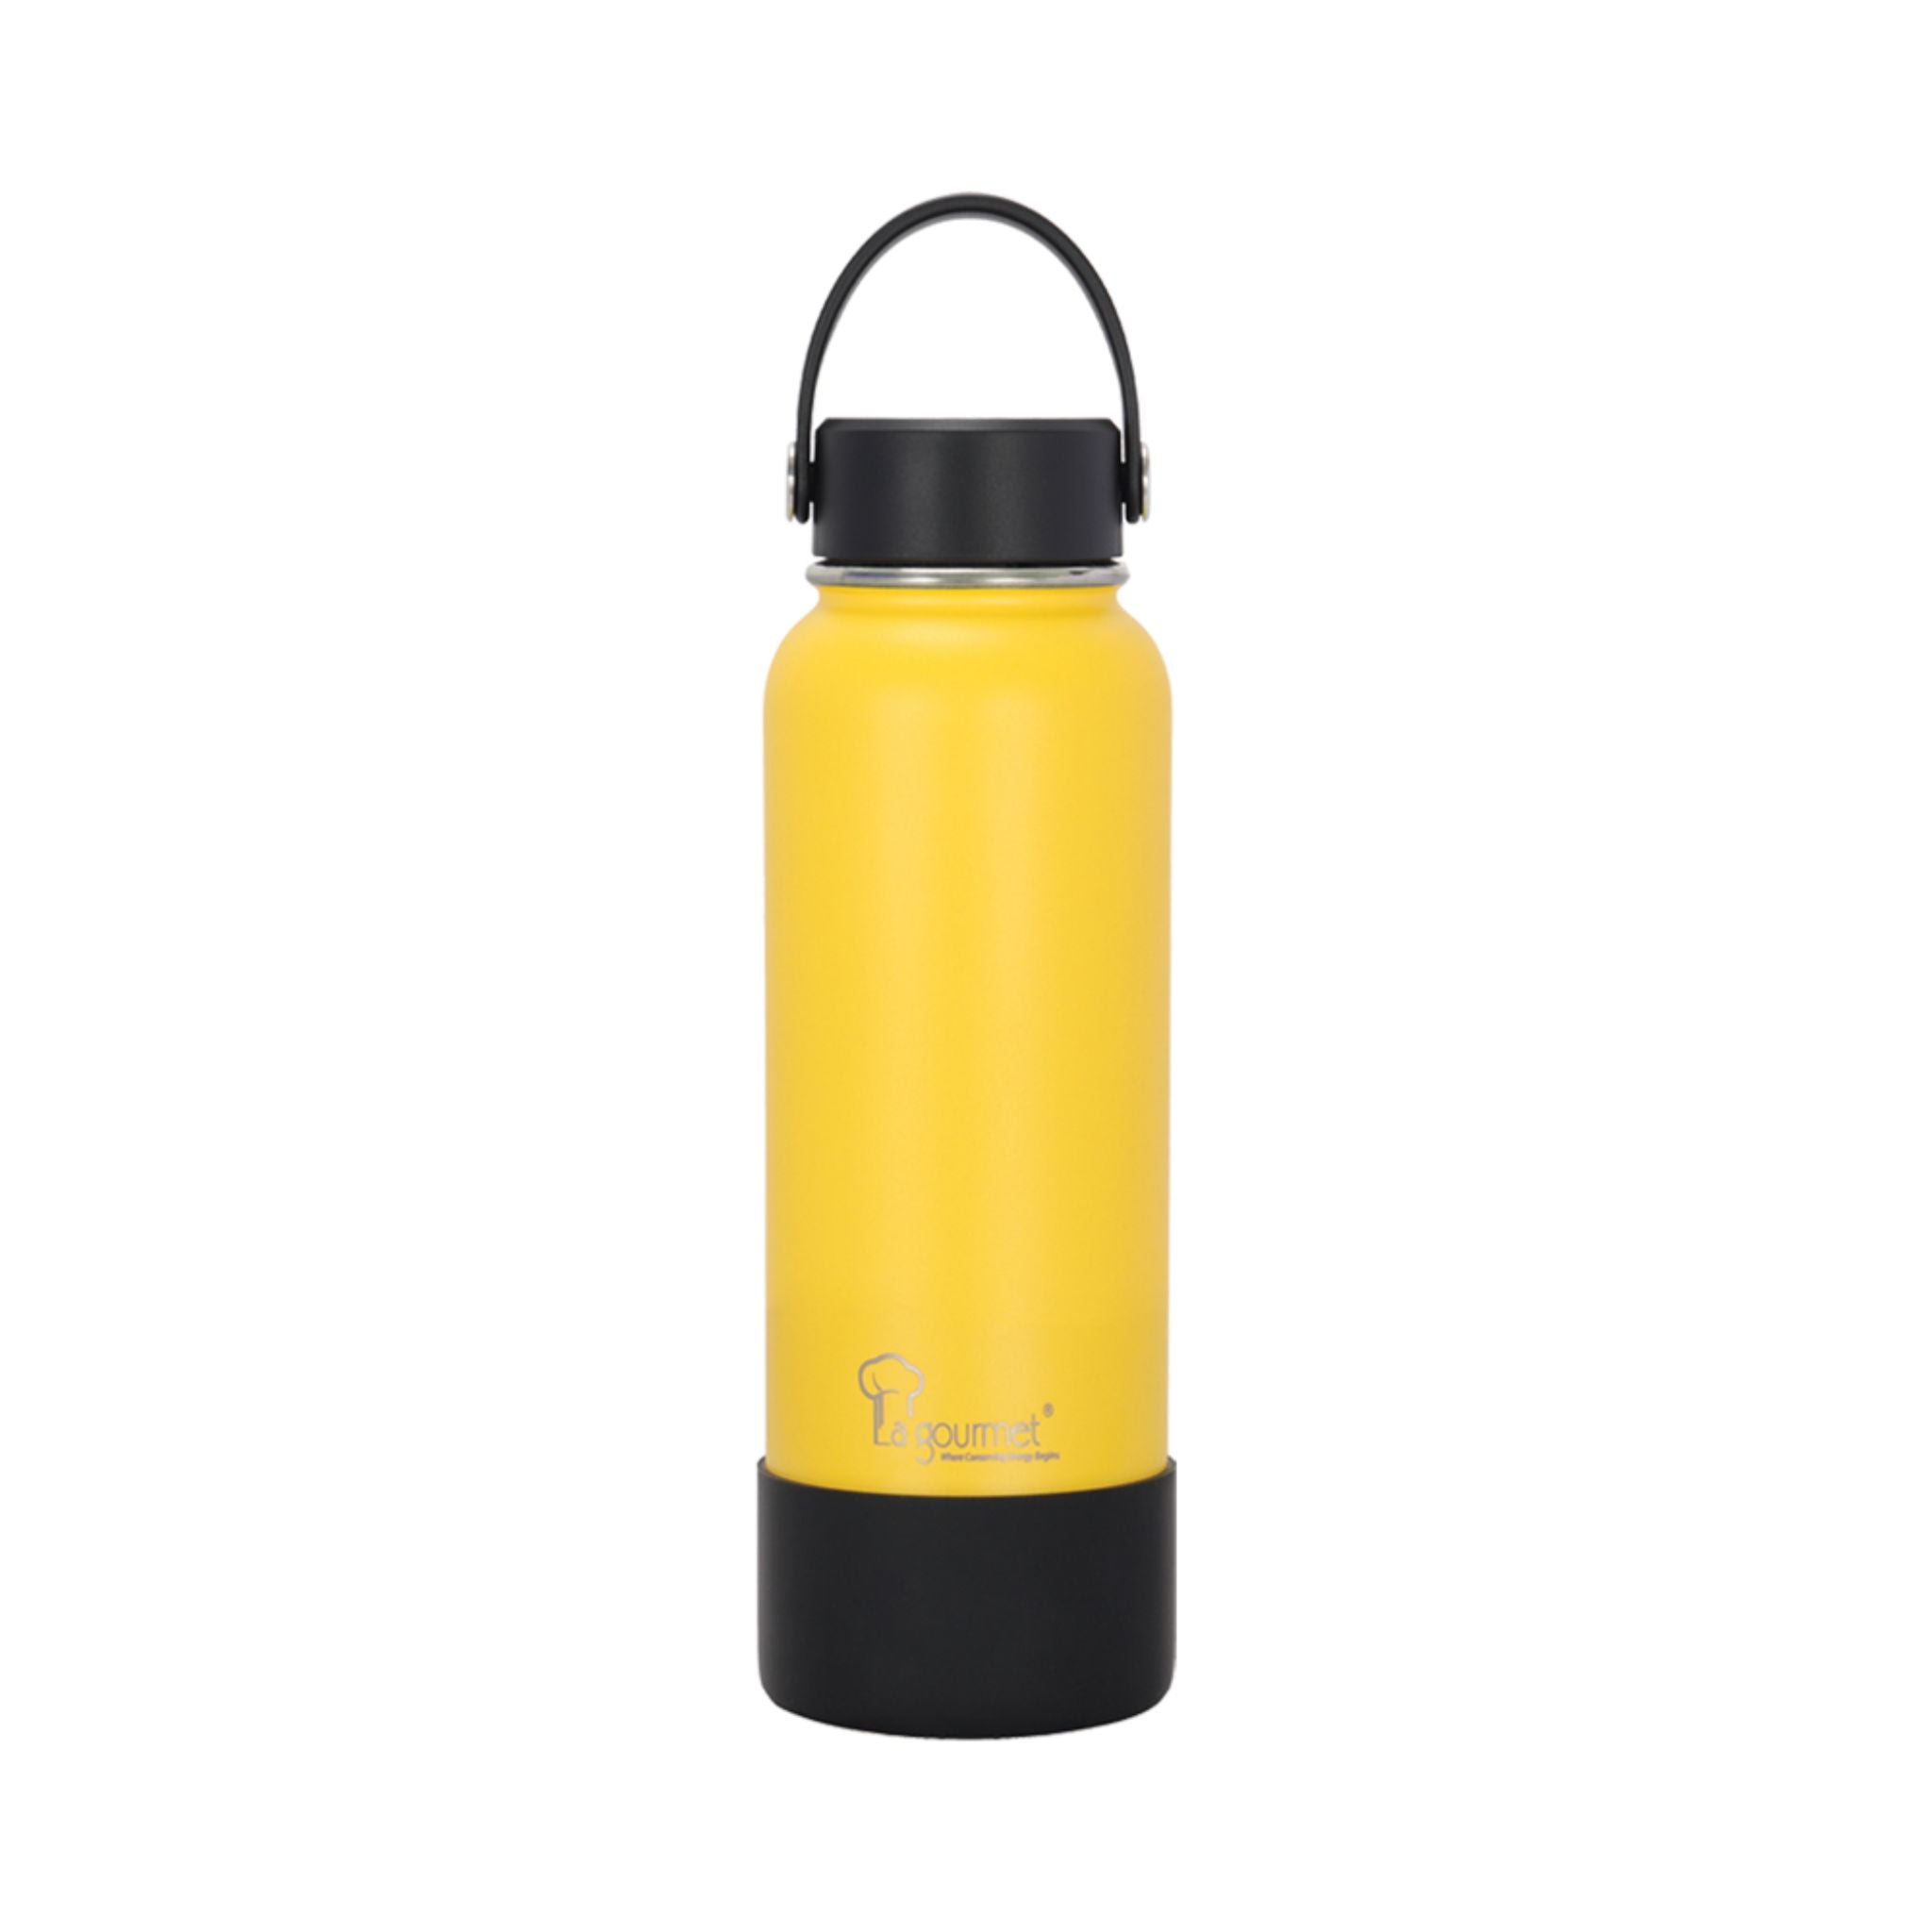 La Gourmet 1200ml Ritz Thermal Bottle with Silicone Bottle Keep Hot/Cold (Yellow) (LGRZ408495)